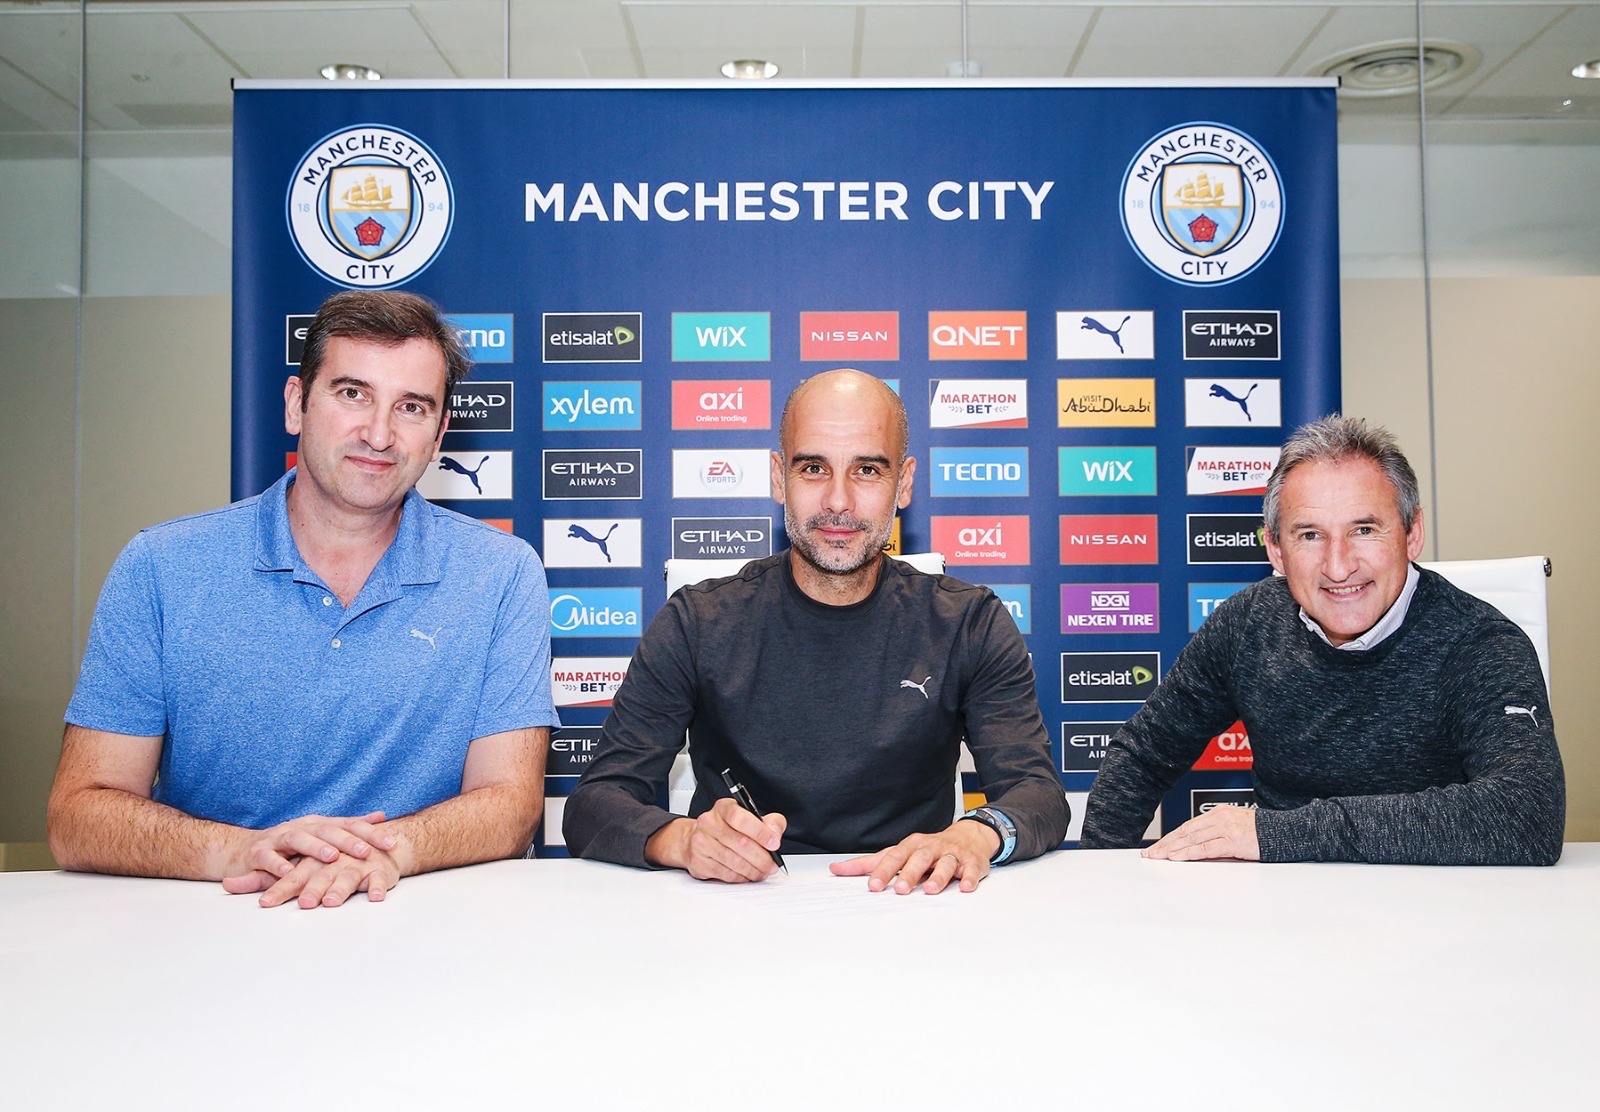 Pep Guardiola has committed his long-term future to Manchester City by agreeing a new deal